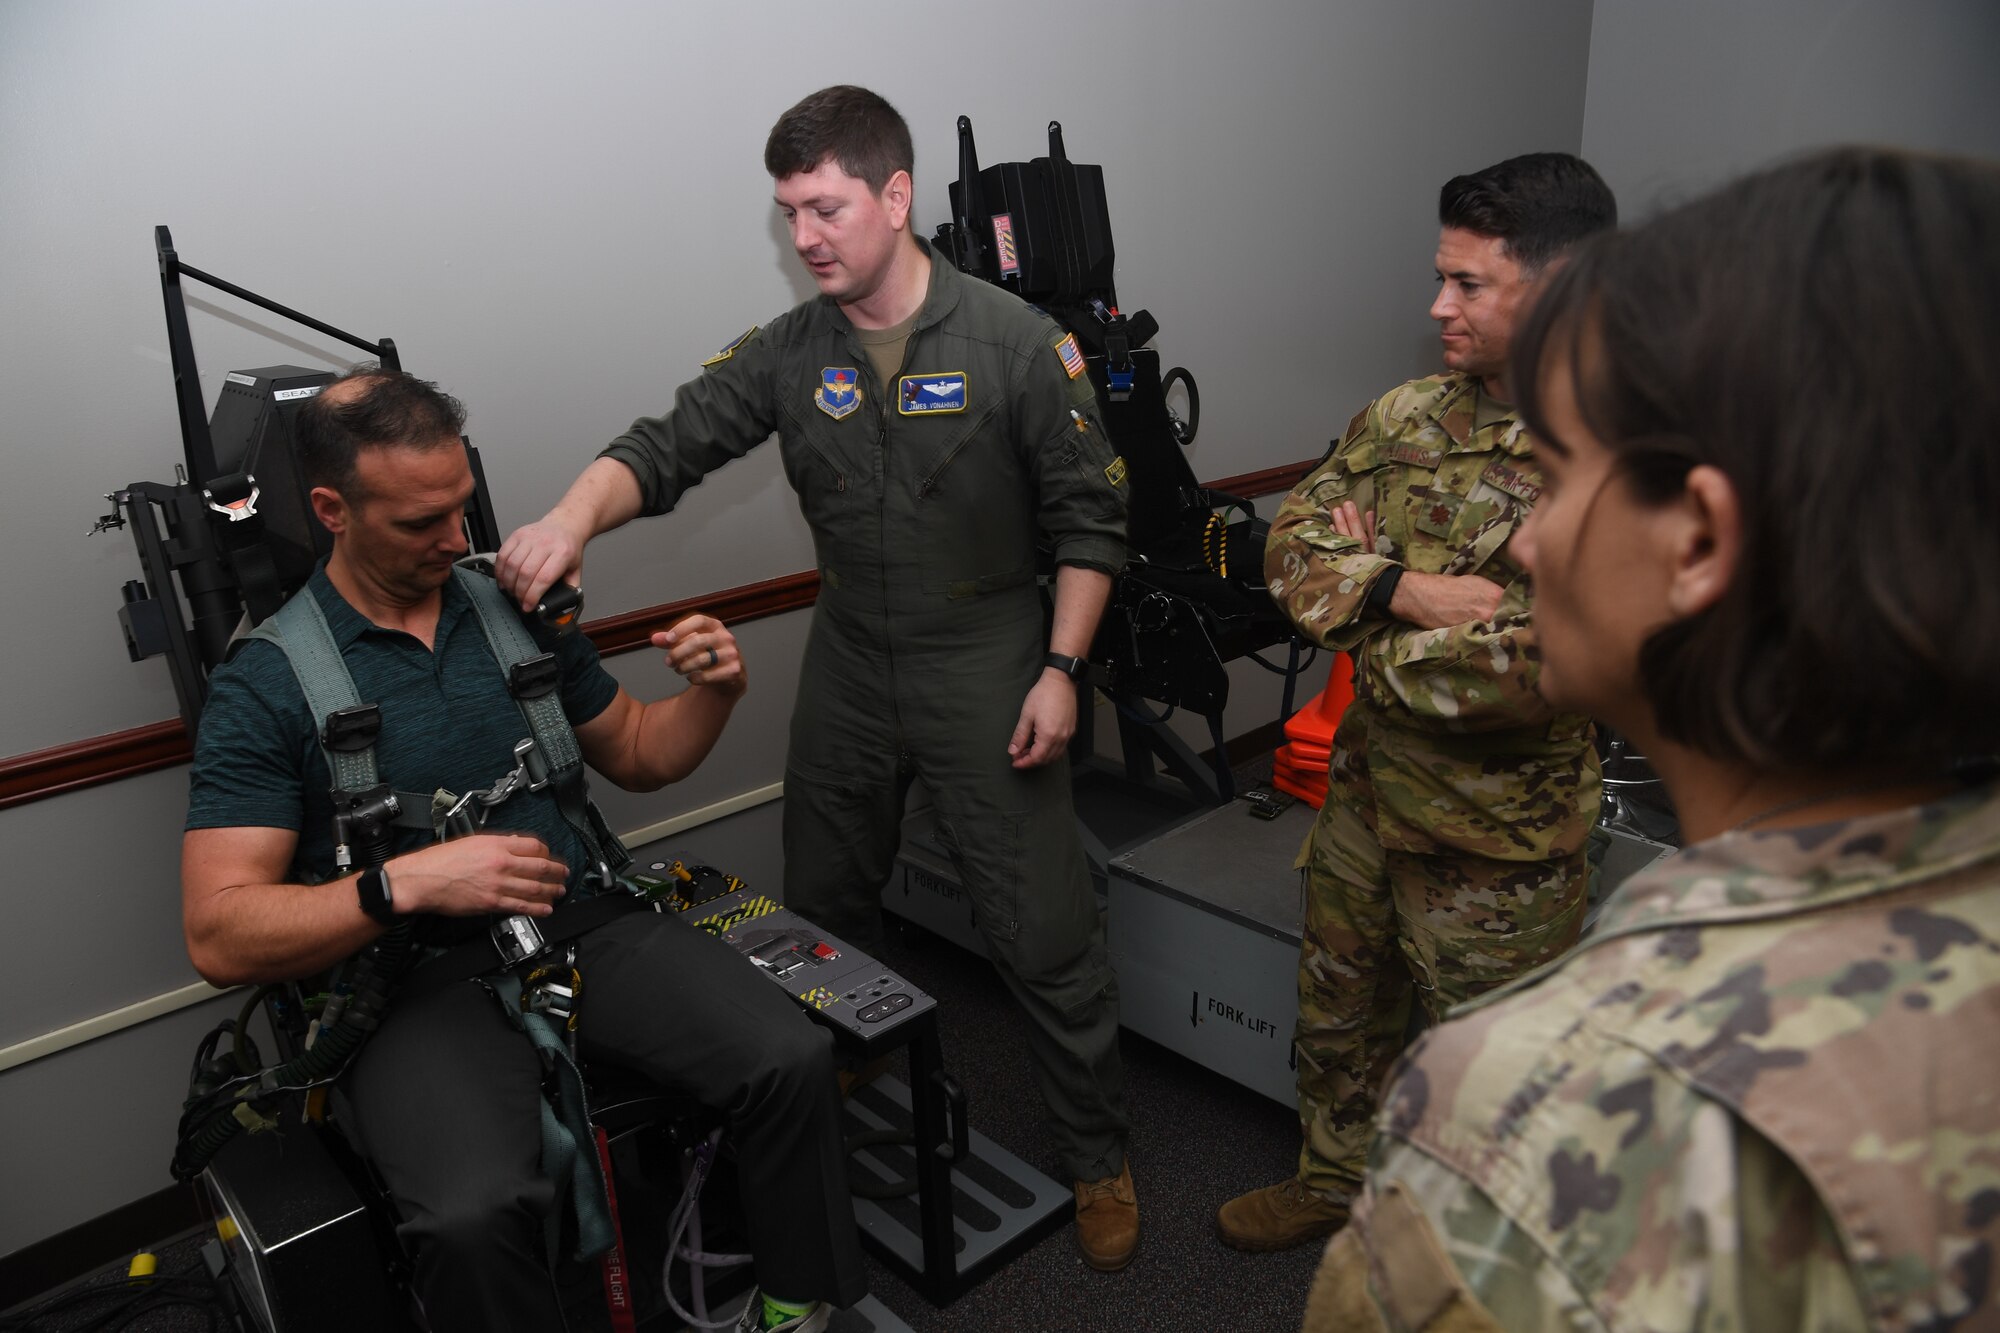 Dr. John Gassaway receives instruction on how to secure himself and egress from an ejection seat